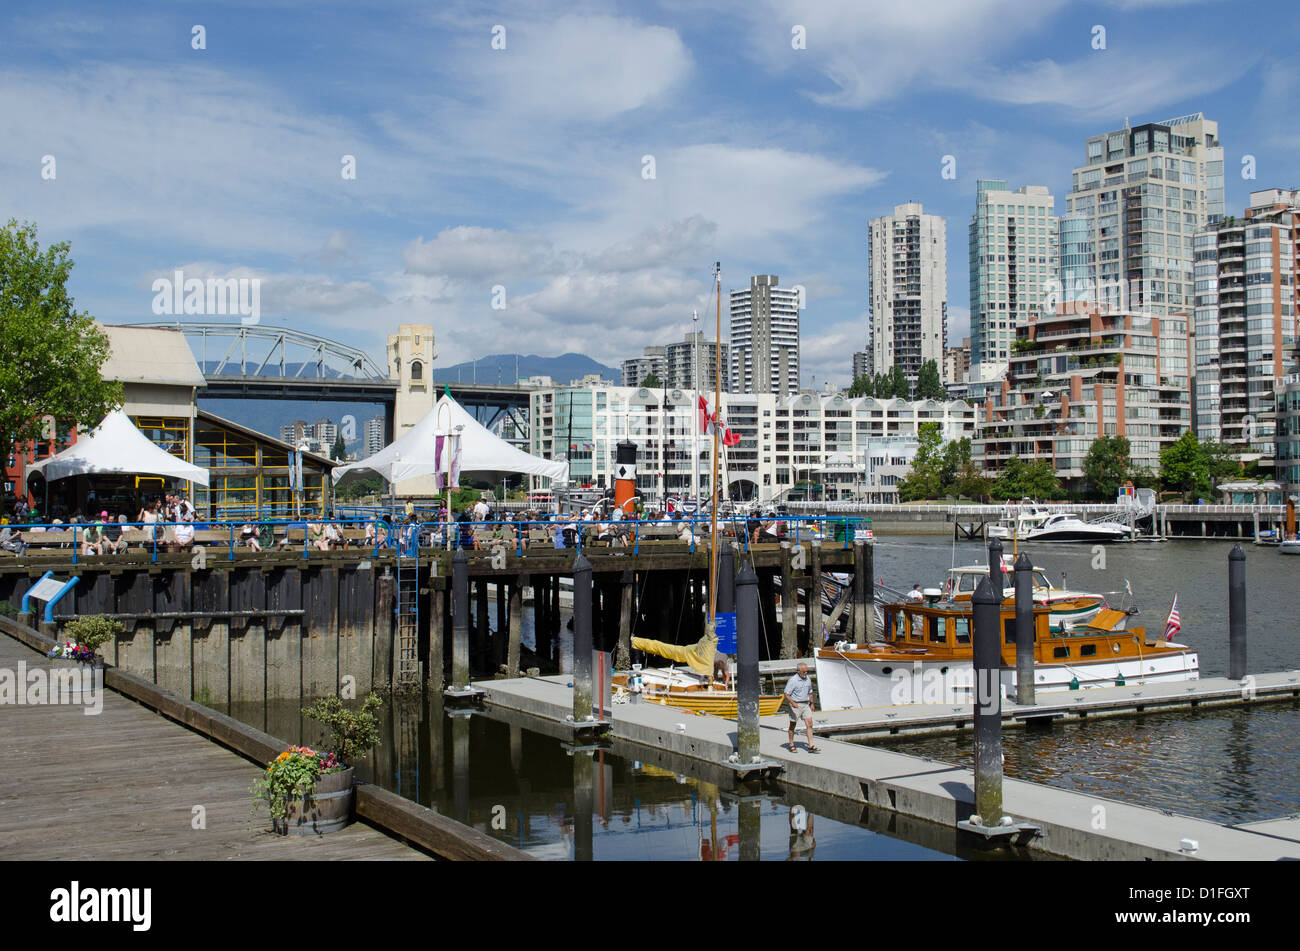 The ultra modern city of Vancouver British Columbia Canada with its seaport and skyscrapers Stock Photo